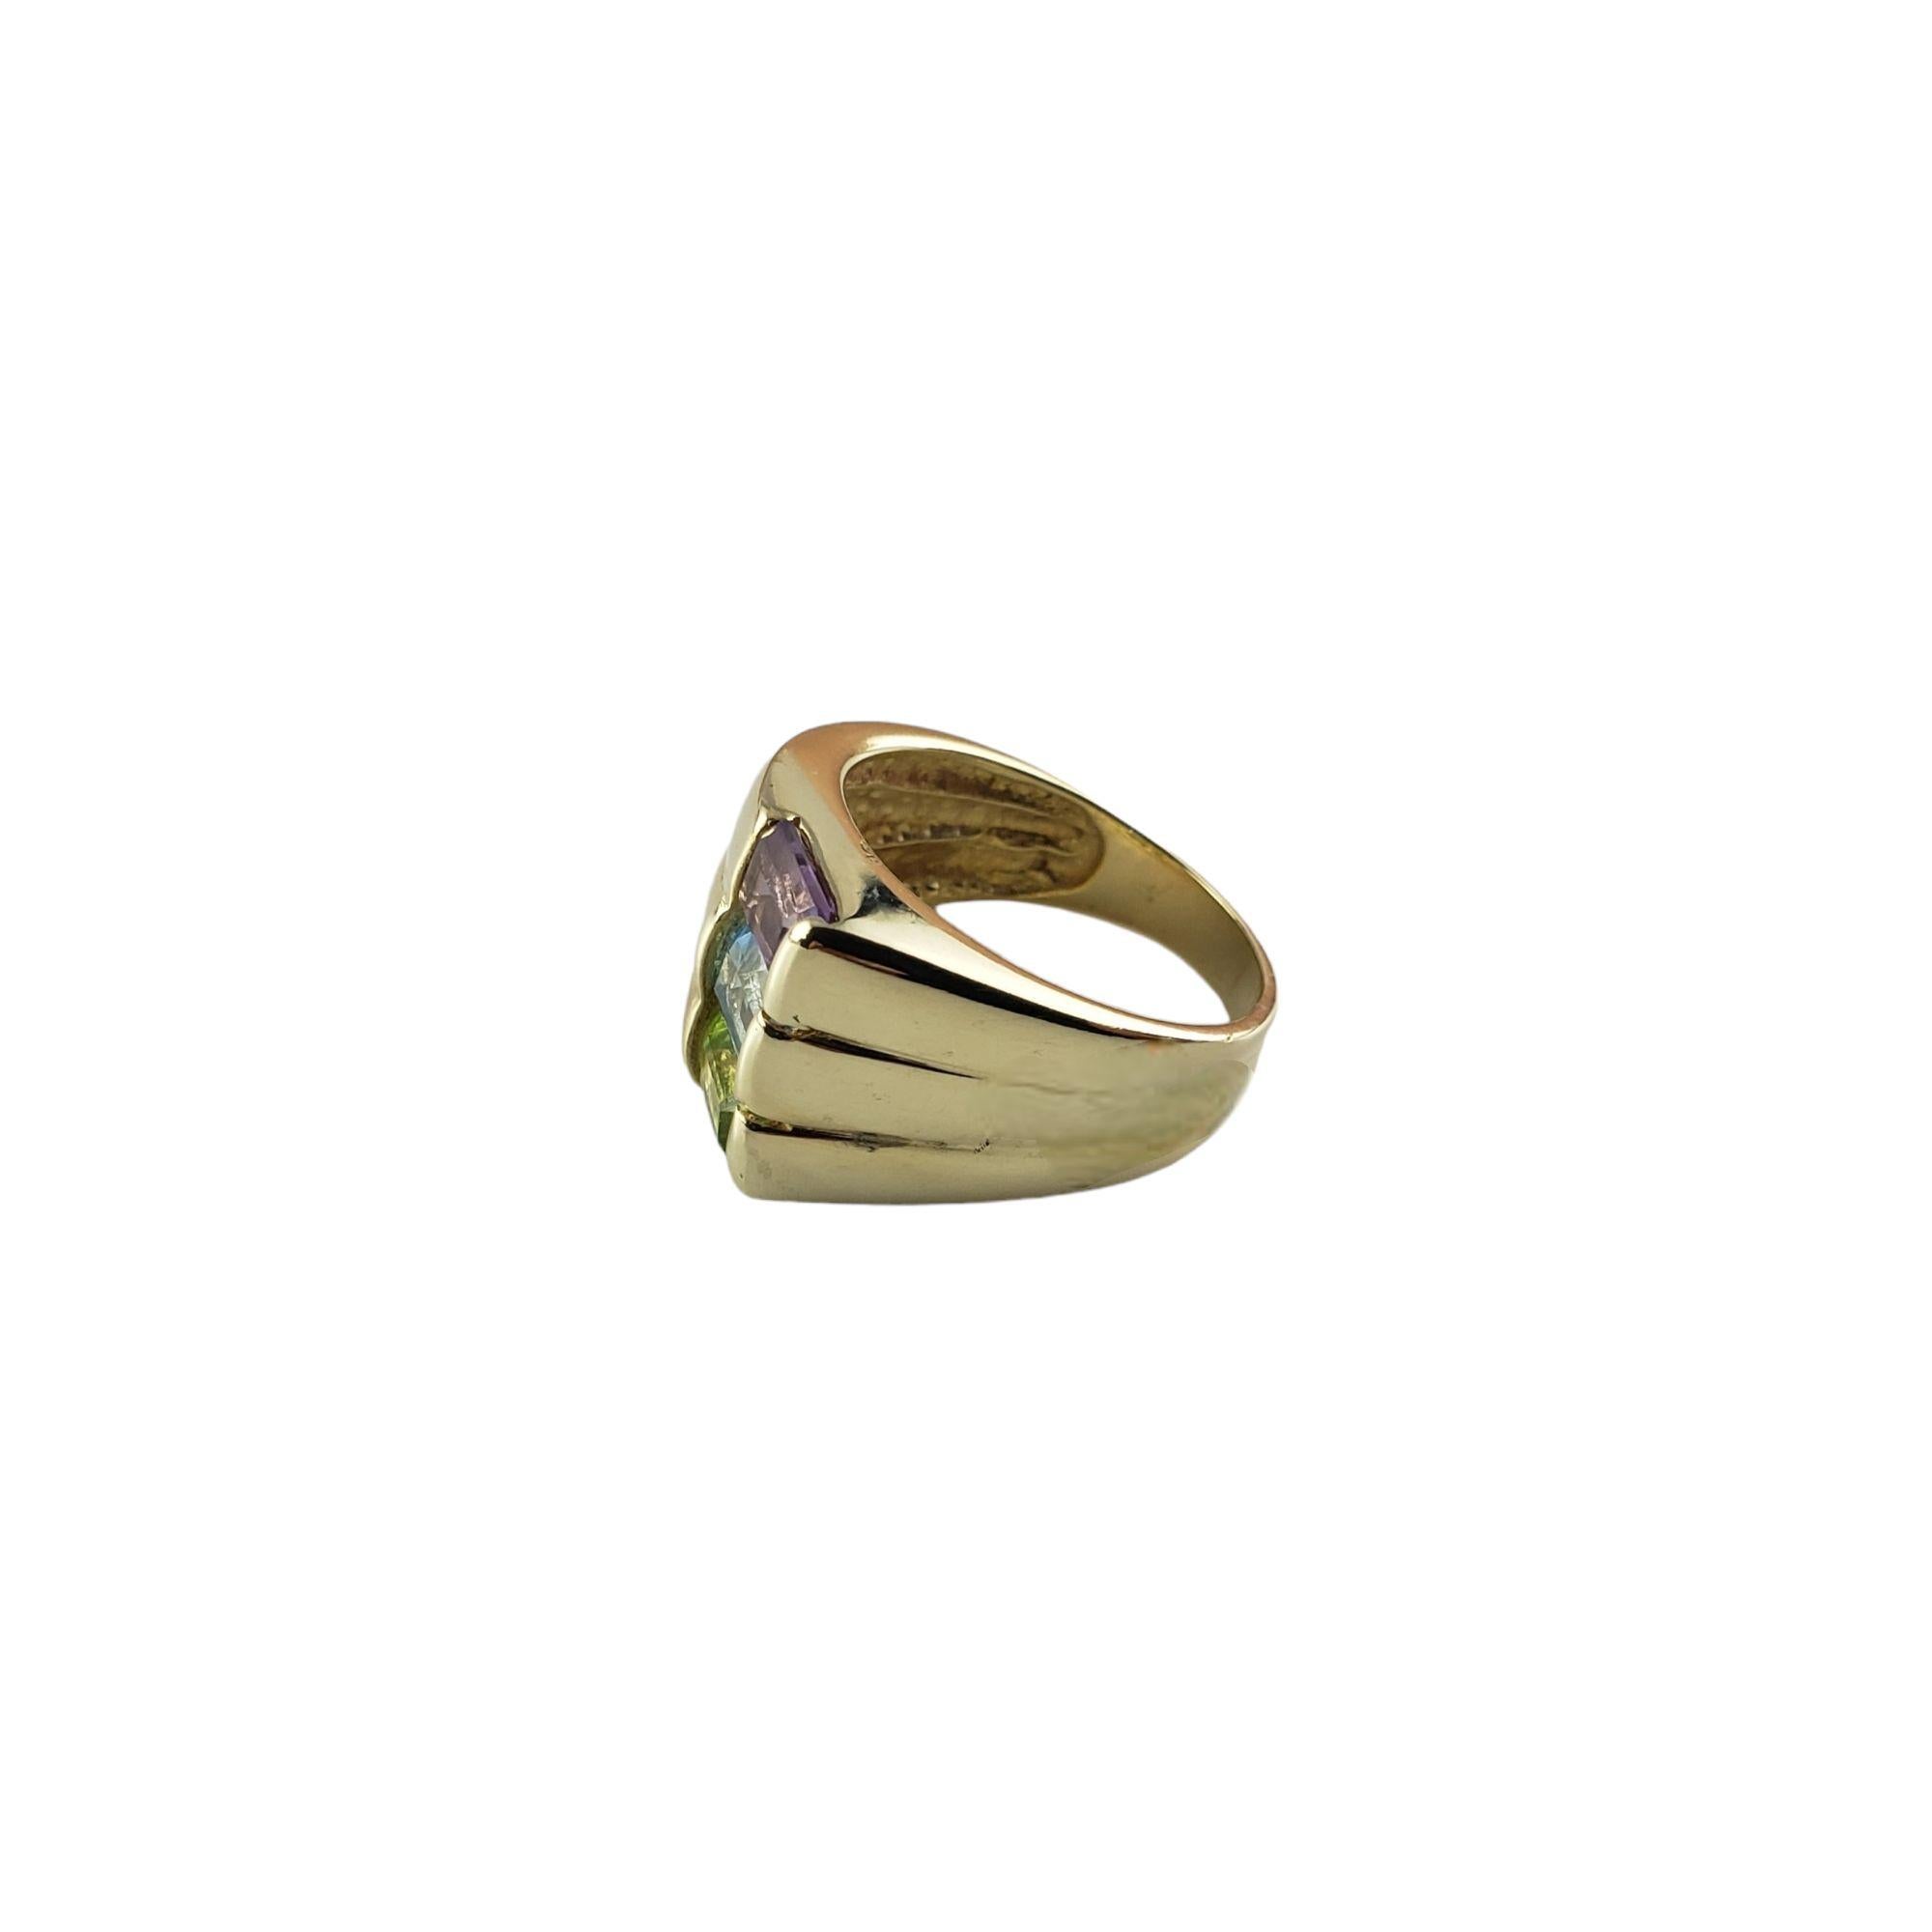 Emerald Cut 14 Karat Yellow Gold Topaz, Peridot and Amethyst Ring Size 6.25 #14652 For Sale